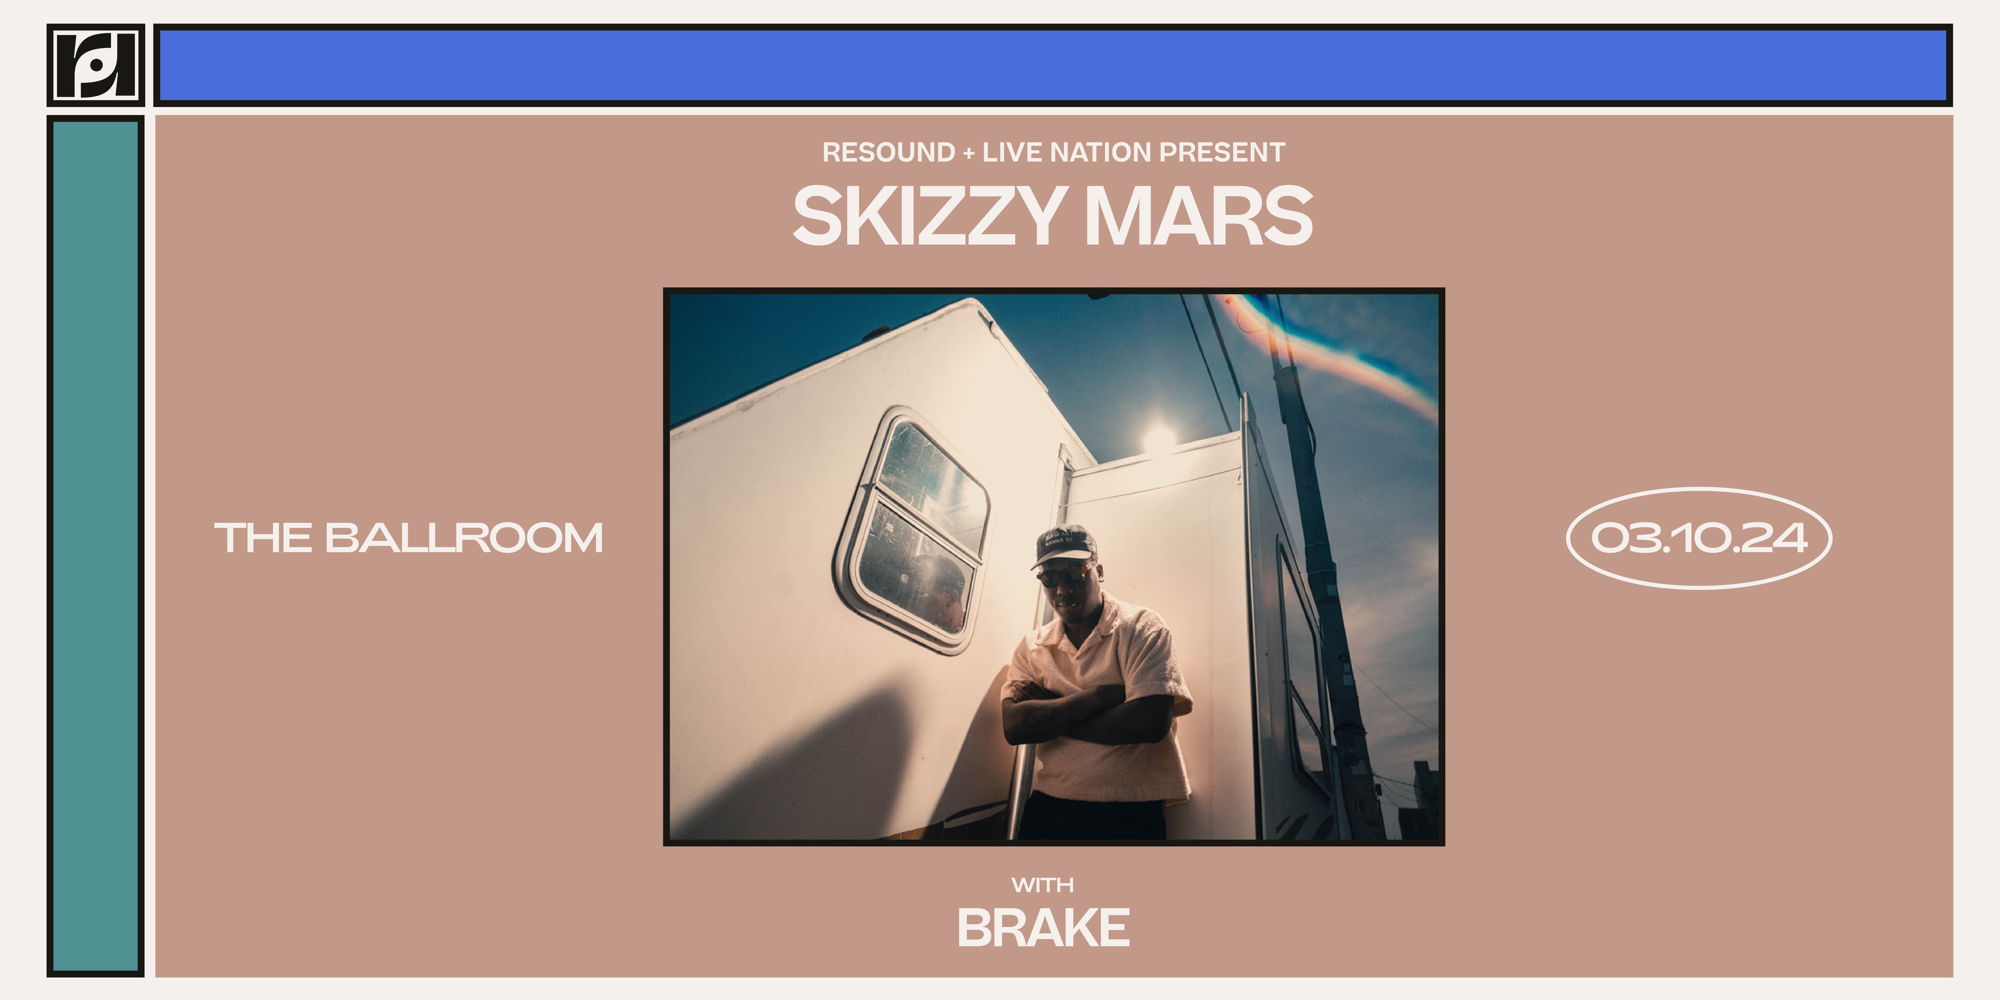 Live Nation & Resound Present: Skizzy Mars - The Bad As We Wanna Be Tour w/ brake at The Ballroom promotional image